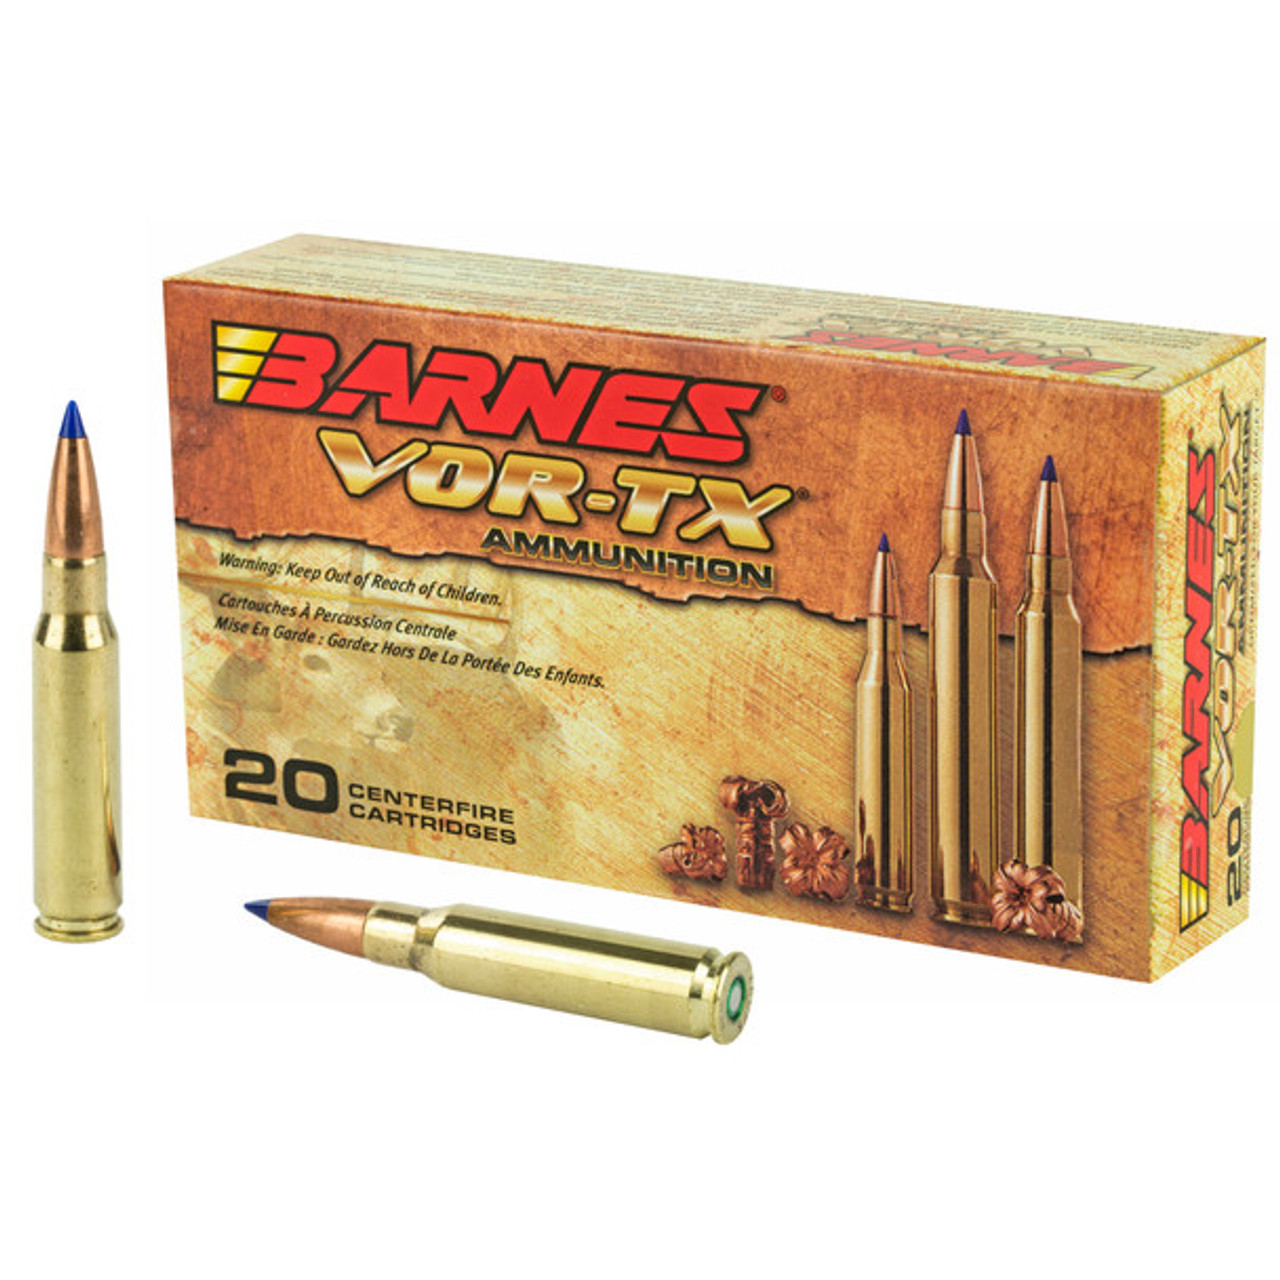 Barnes(R) VOR-TX(R) is precision ammunition loaded with the deadliest bullets on the planet. Barnes, the leader in bullet innovation offers hunters the ultimate in accuracy, terminal performance and handloaded precision in a factory loaded round. Offering double-diameter expansion, maximum weight retention and excellent accuracy, the TSX(R), Tipped TSX(TM), and TSX FN(TM) provide devastating energy transfer. Multiple grooves in the bullet's shank reduce pressure and improve accuracy. Bullets open instantly on contact - no other bullet expands as quickly. Nose peels back into four sharp-edged copper petals.

Barnes, VOR-TX, 308WIN, 168 Grain, Tipped Triple Shock X, Boat Tail, Lead Free, 20 Round Box, California Certified Nonlead Ammunition
308 Winchester
2,700 Feet per second
168 Grain TTSX boat tail
20 Rounds per box
Lead free